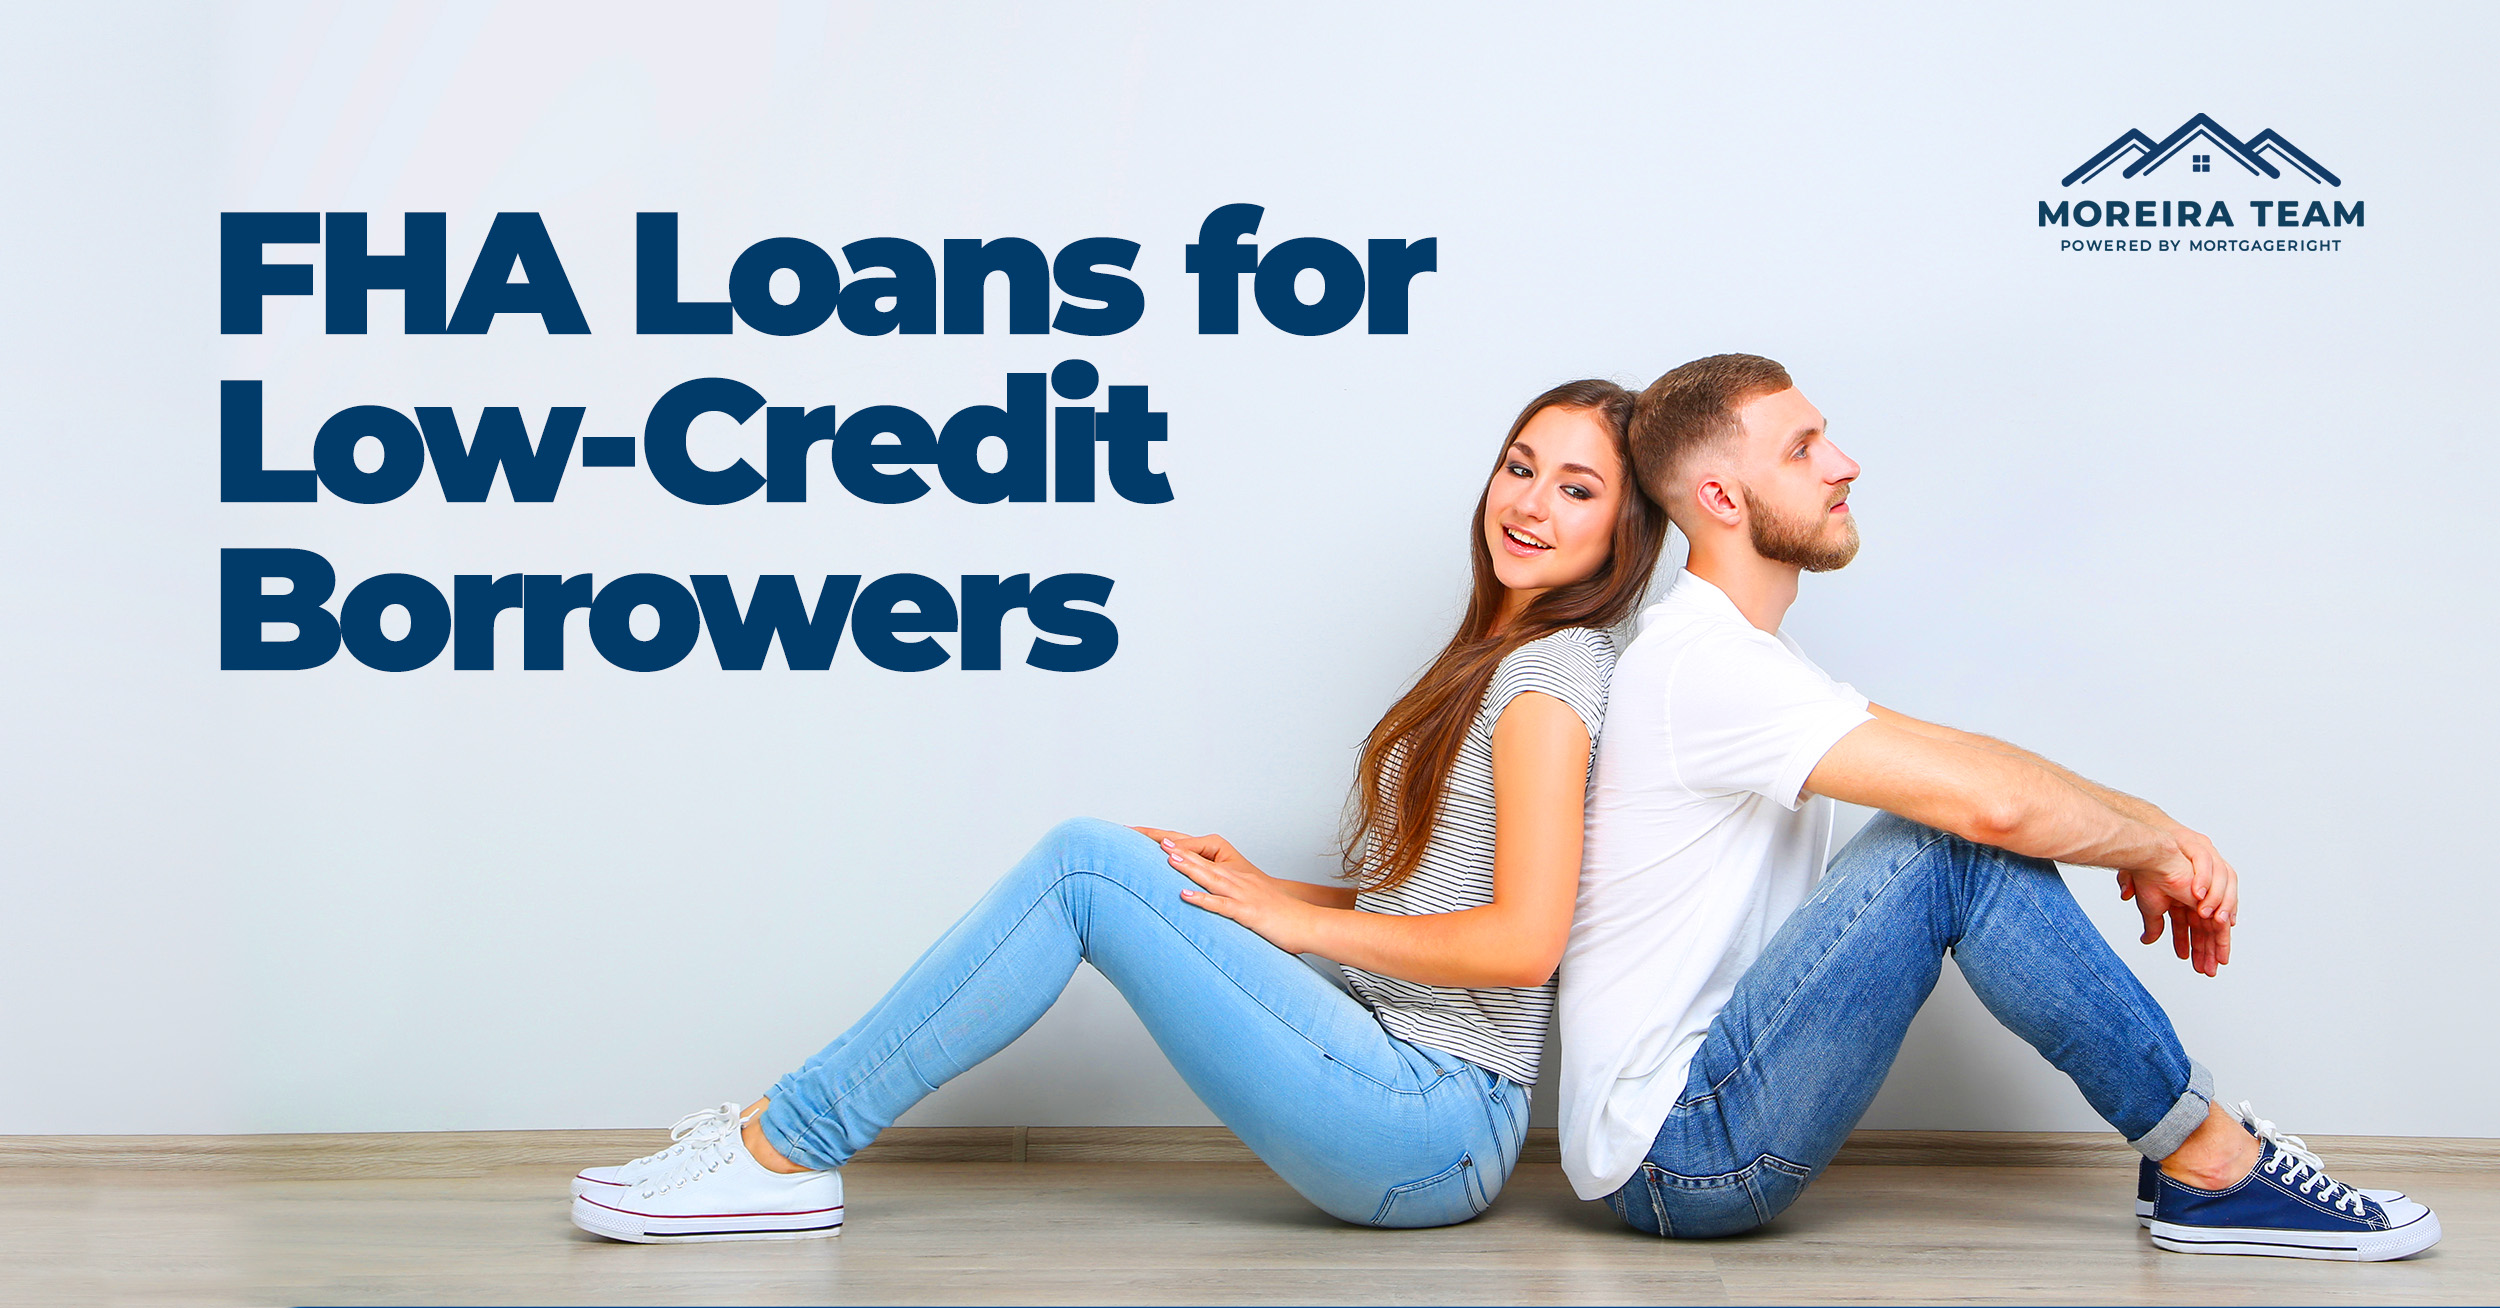 FHA loan for low credit borrowers